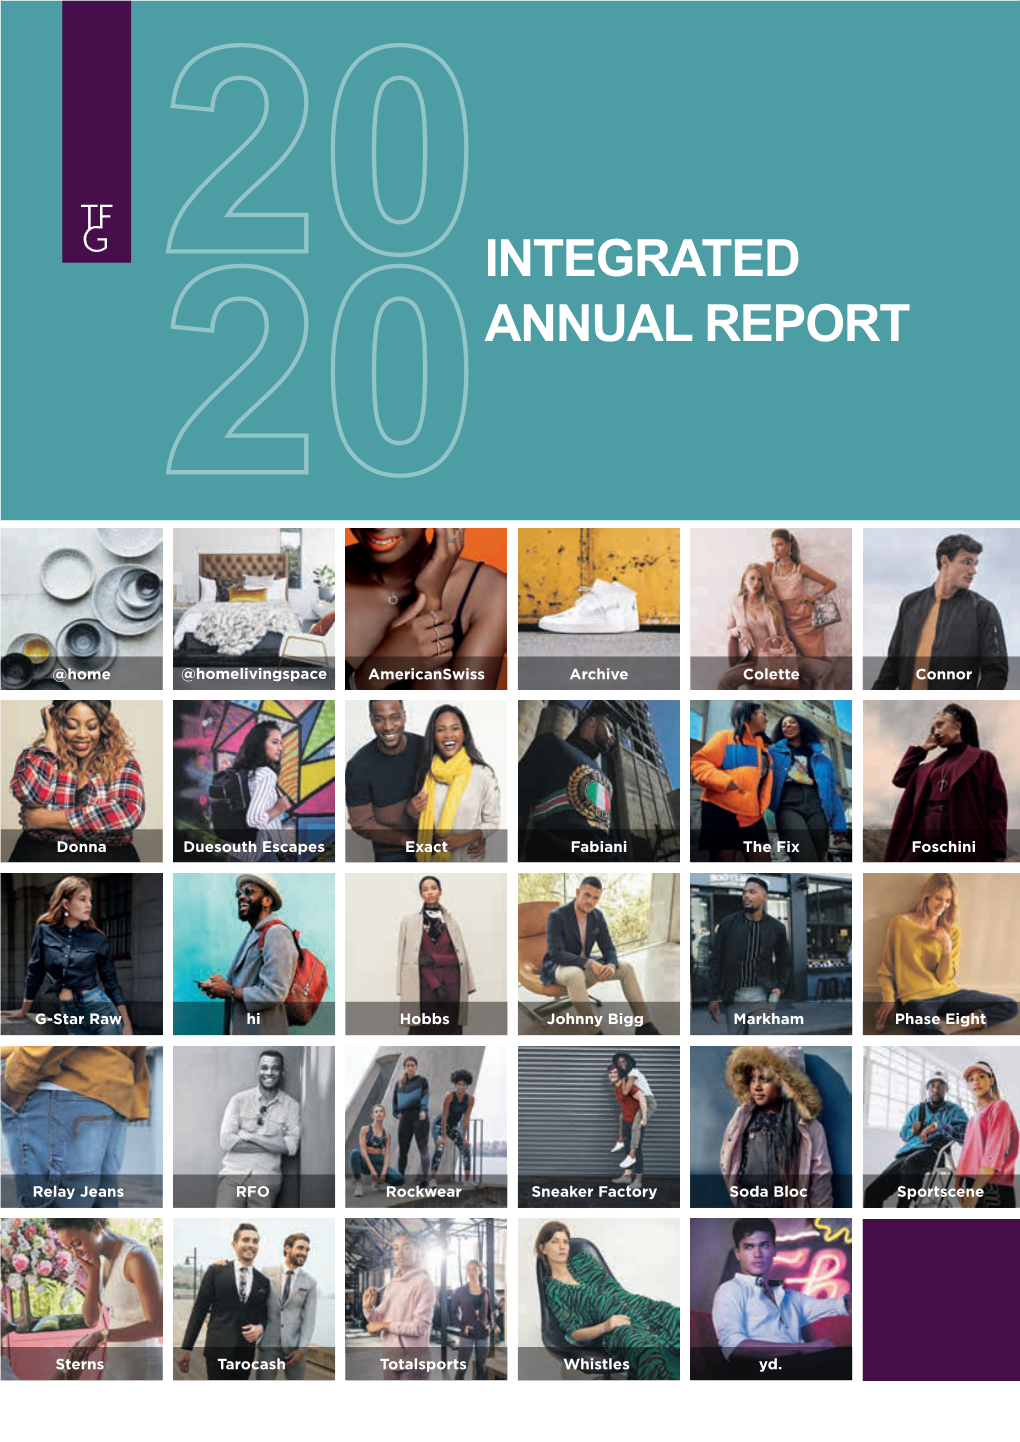 Integrated Annual Report 2020 1 TFG’S Performance